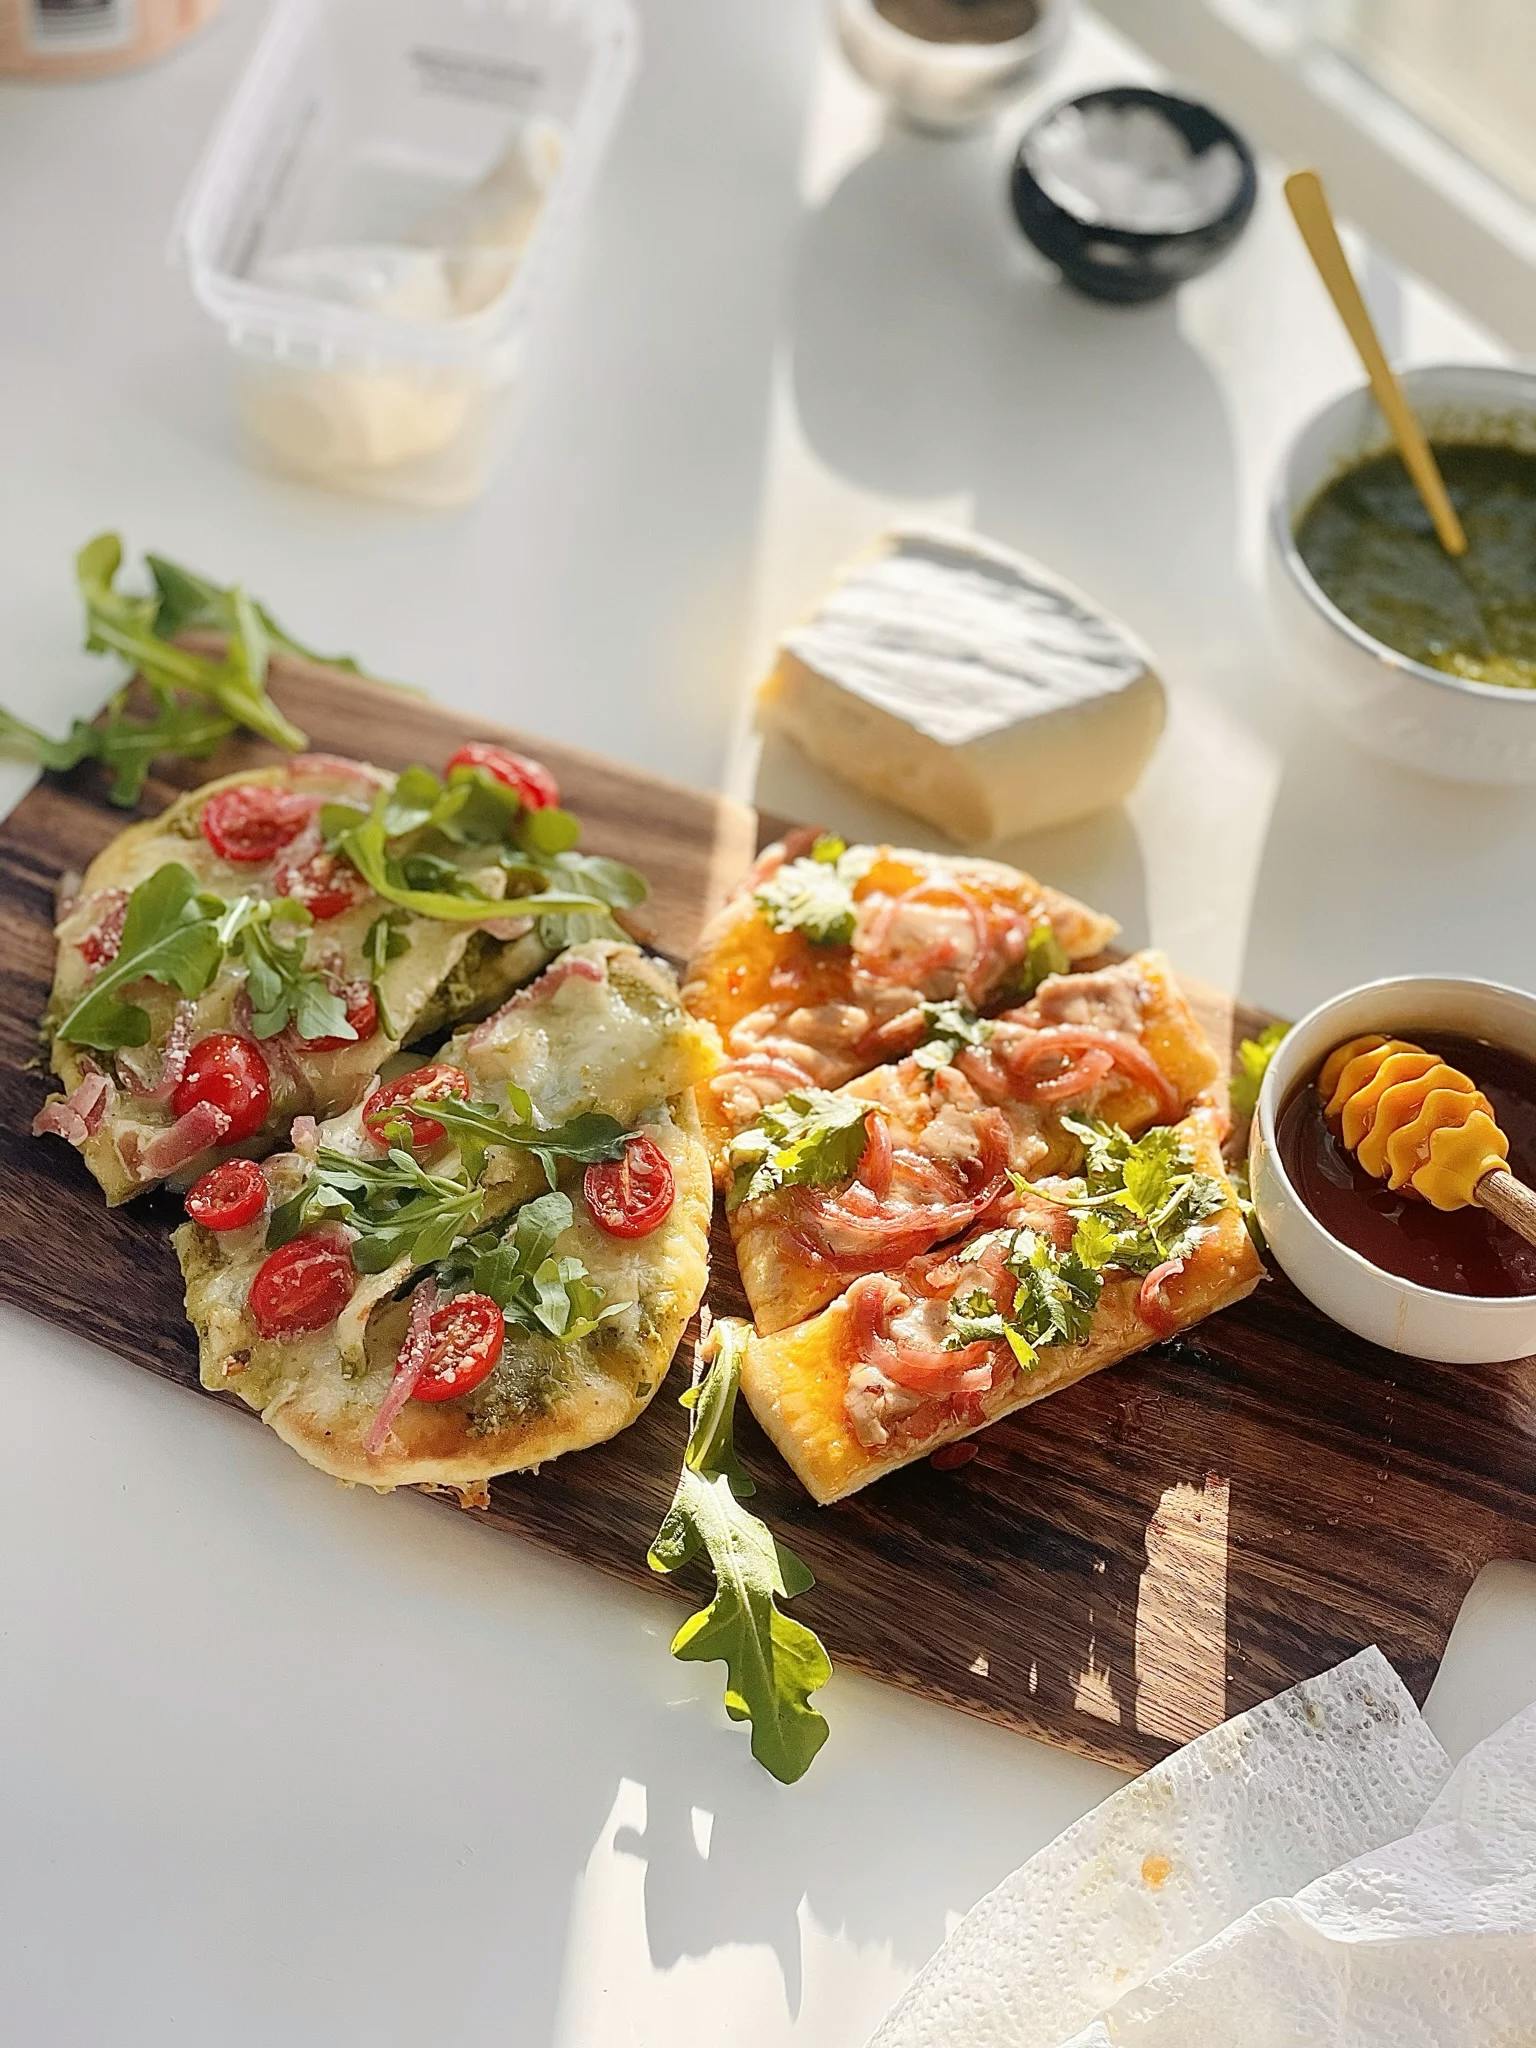 Picture for Weeknight Flatbread Dinner